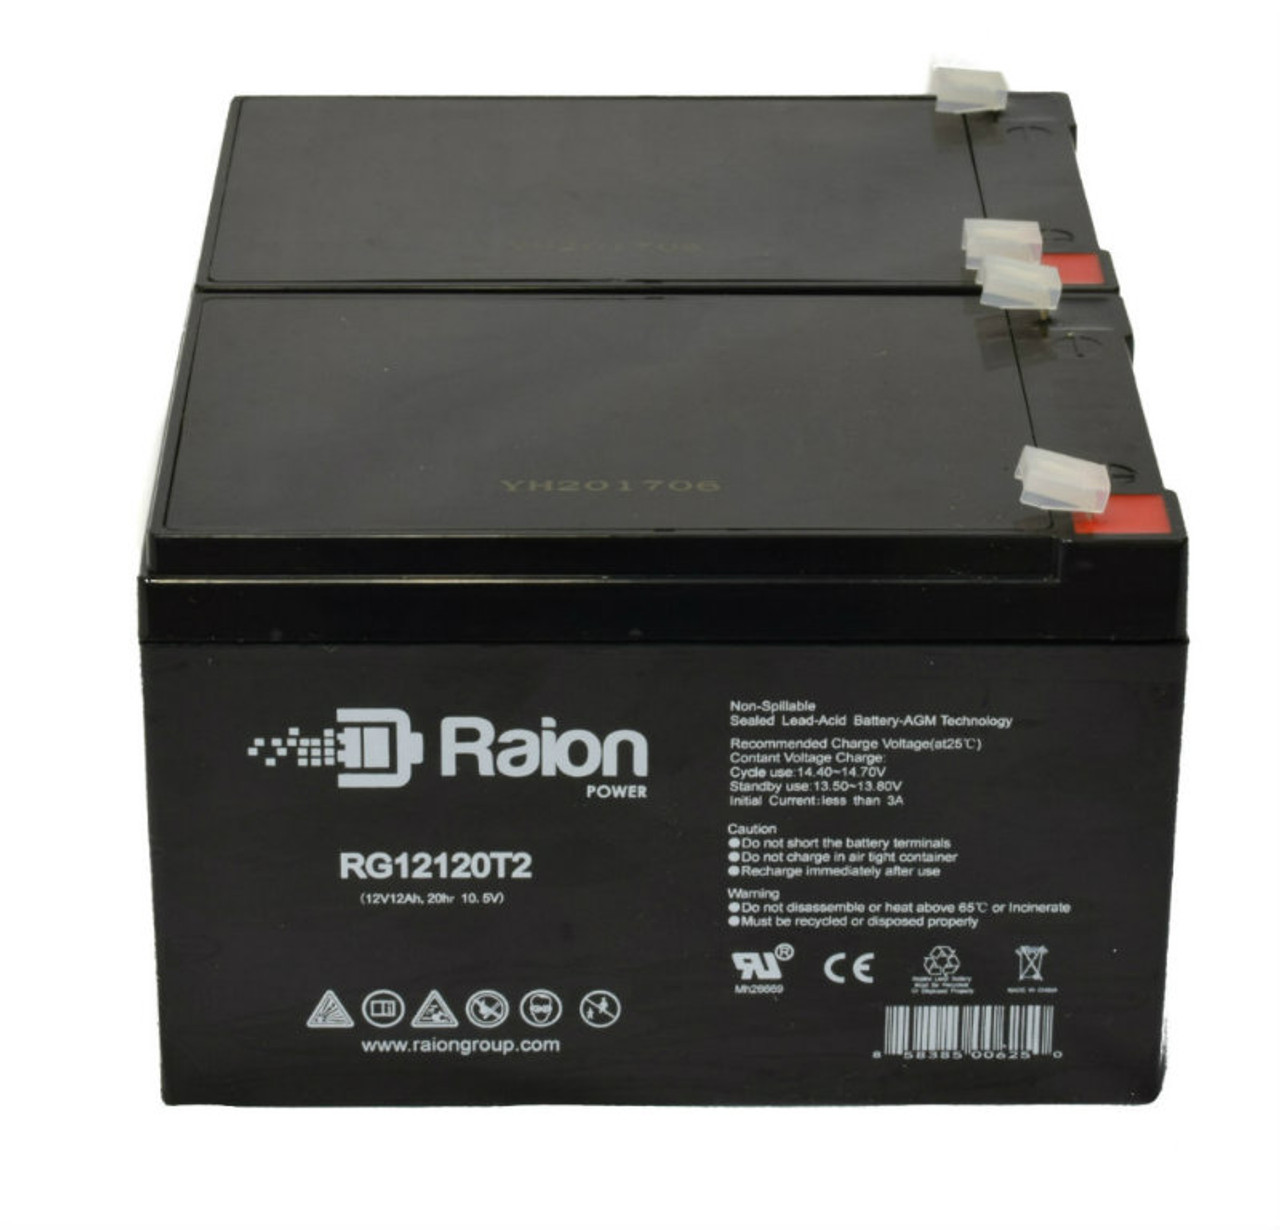 Raion Power RG12120T2 Replacement Battery Set for Zip'r Mobility ZIPR3 3-Wheel Leisure Travel Scooter Mobility Scooter - 2 Pack